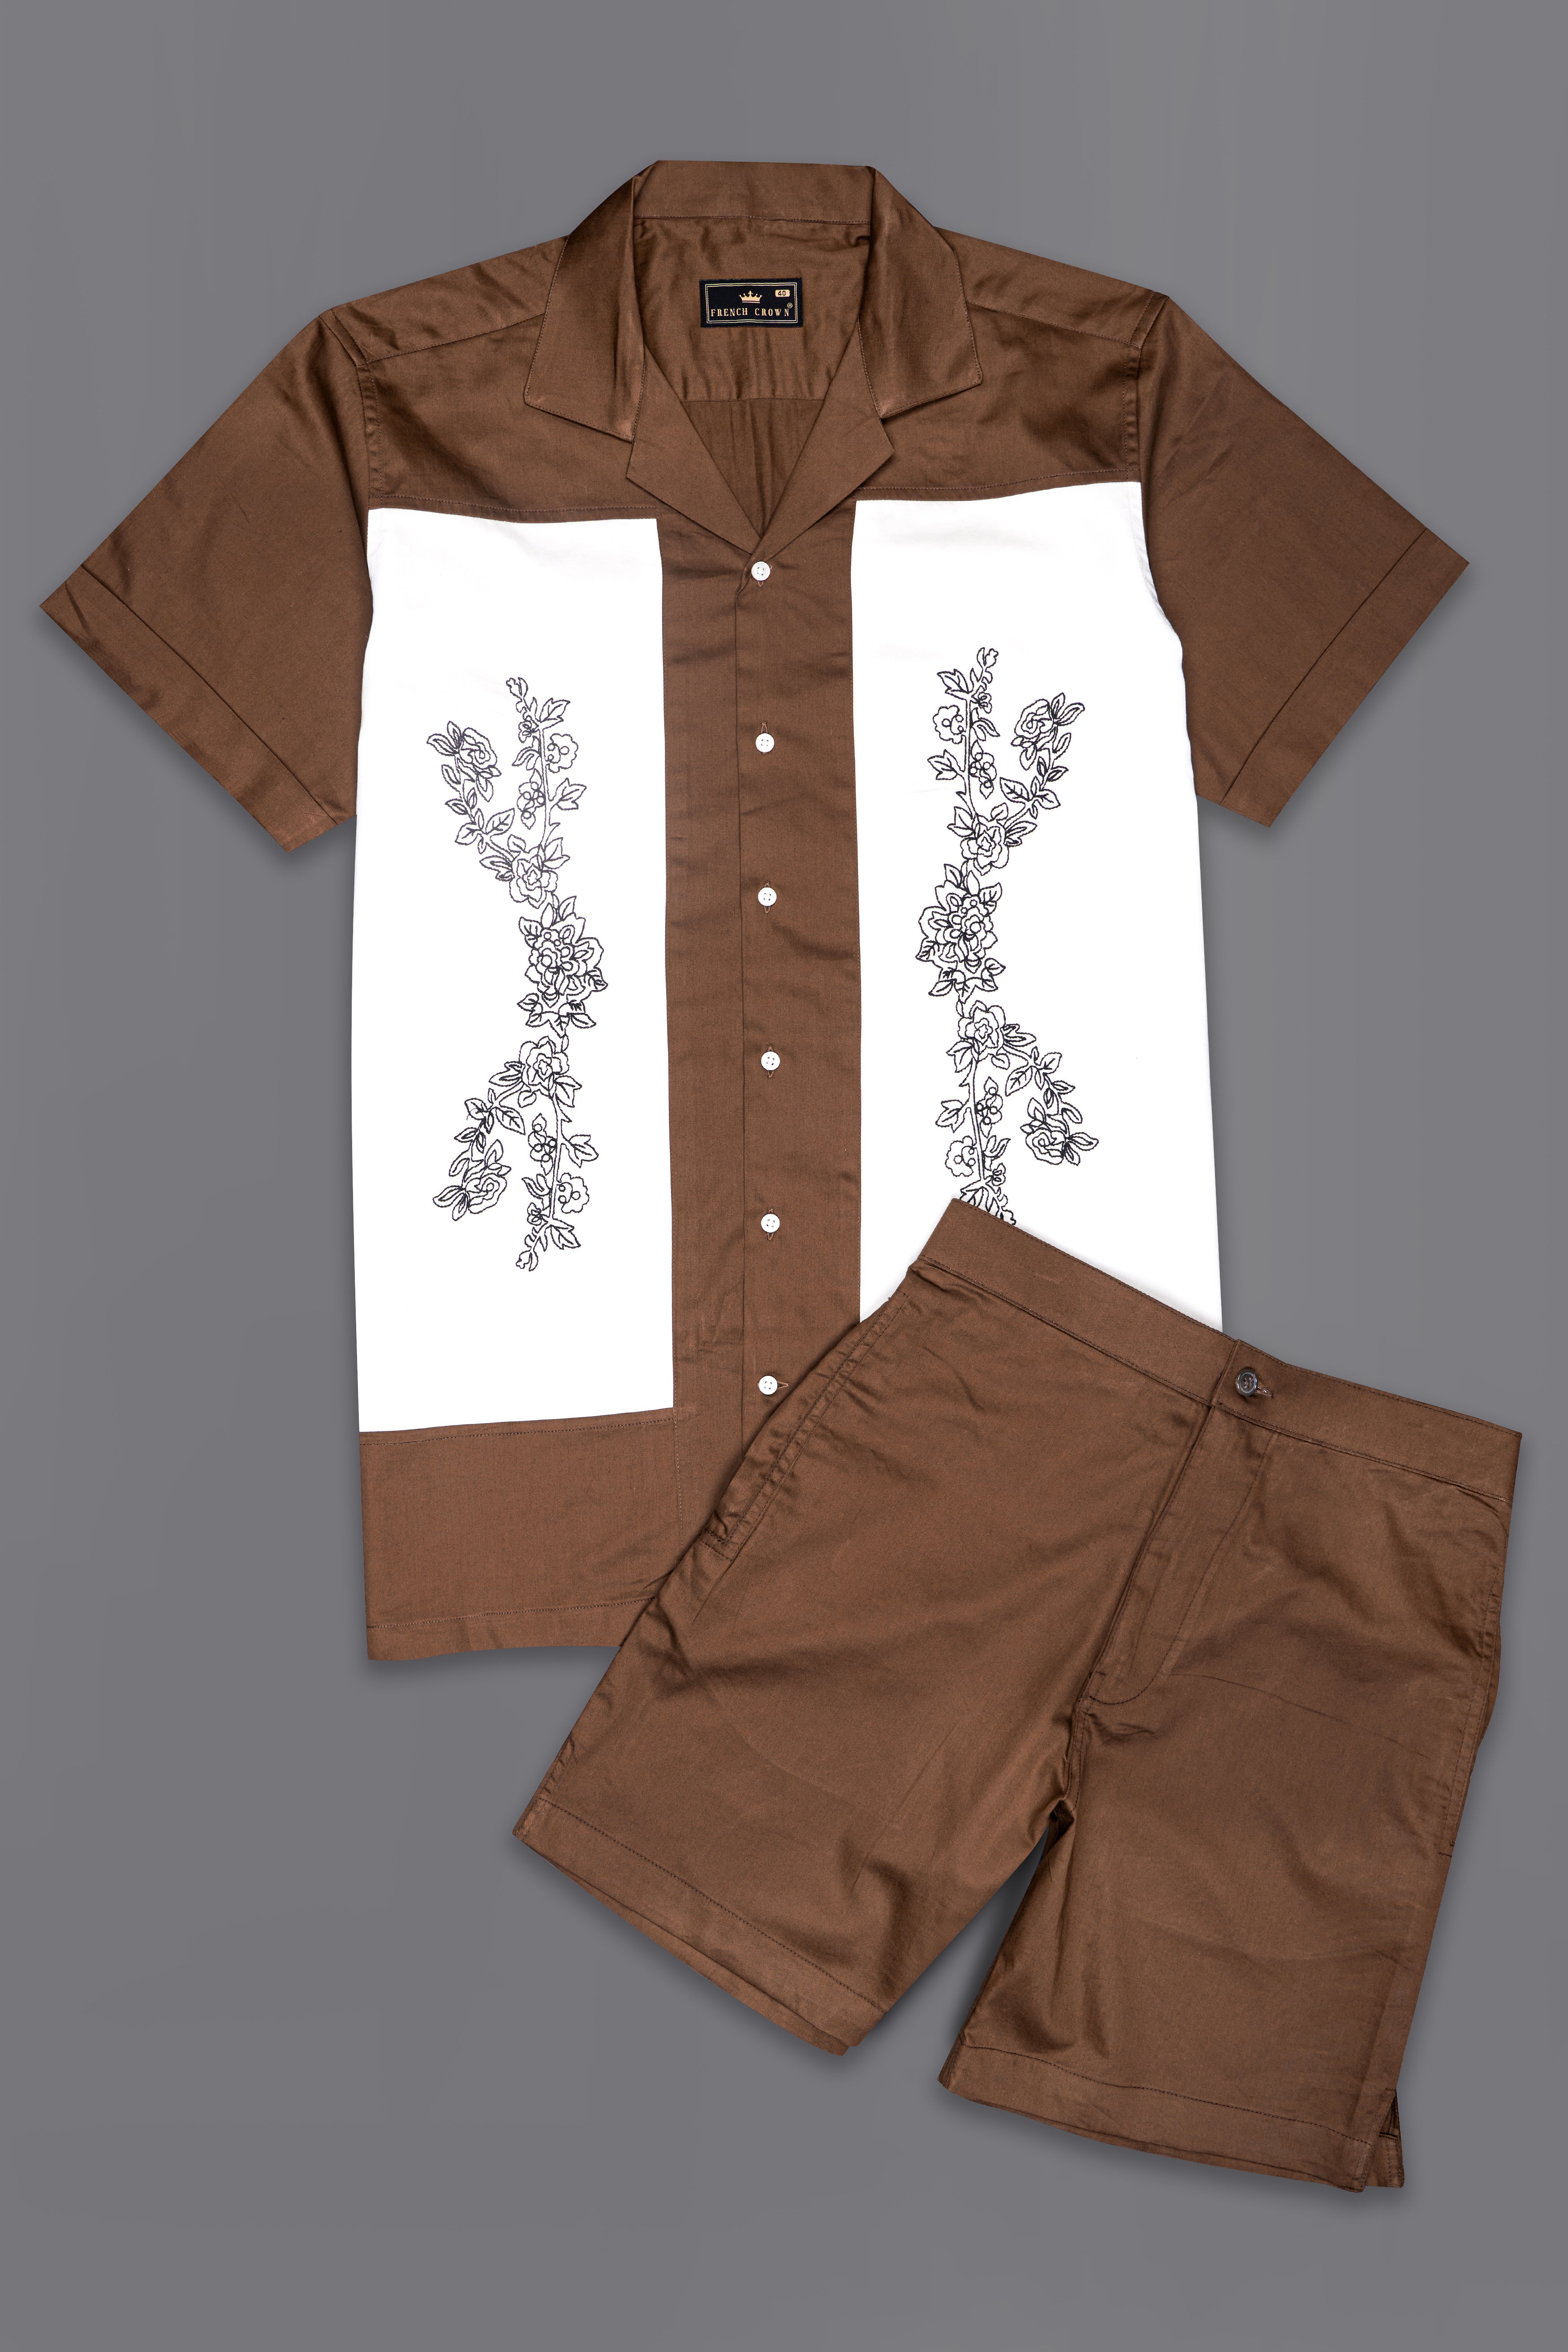 Pickled Brown and White Floral Printed Super Soft Premium Cotton Co-ord Sets 10077-CC-SS-P691-SR269-38, 10077-CC-SS-P691-SR269-39, 10077-CC-SS-P691-SR269-40, 10077-CC-SS-P691-SR269-42, 10077-CC-SS-P691-SR269-44, 10077-CC-SS-P691-SR269-46, 10077-CC-SS-P691-SR269-48, 10077-CC-SS-P691-SR269-50, 10077-CC-SS-P691-SR269-52